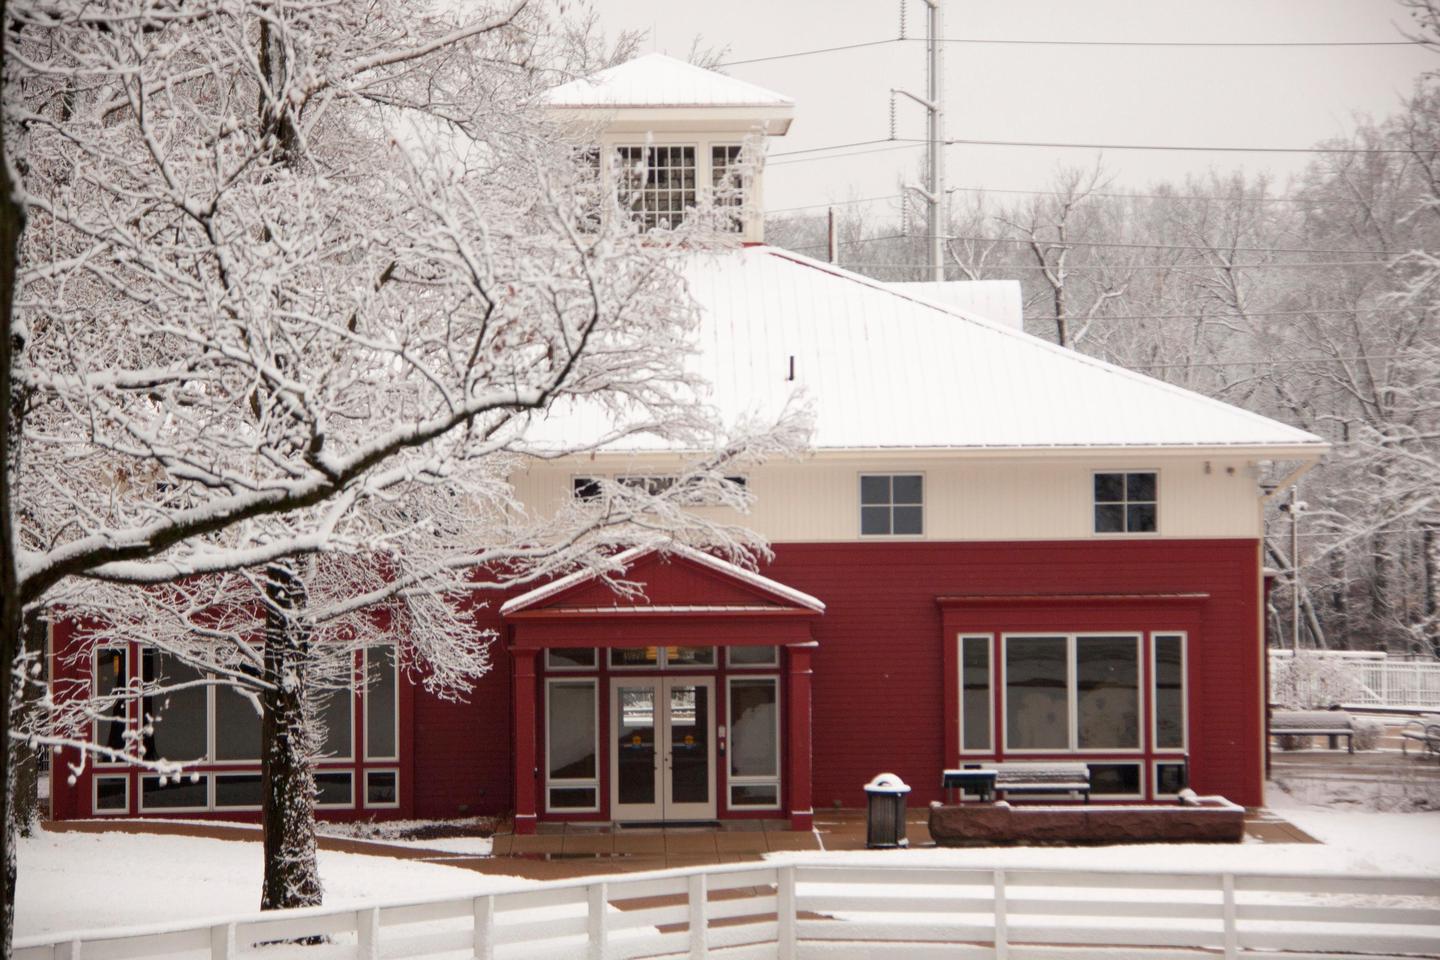 Visitor Center in the SnowVisitor Center at Ulysses S. Grant National Historic Site on a snowy day.